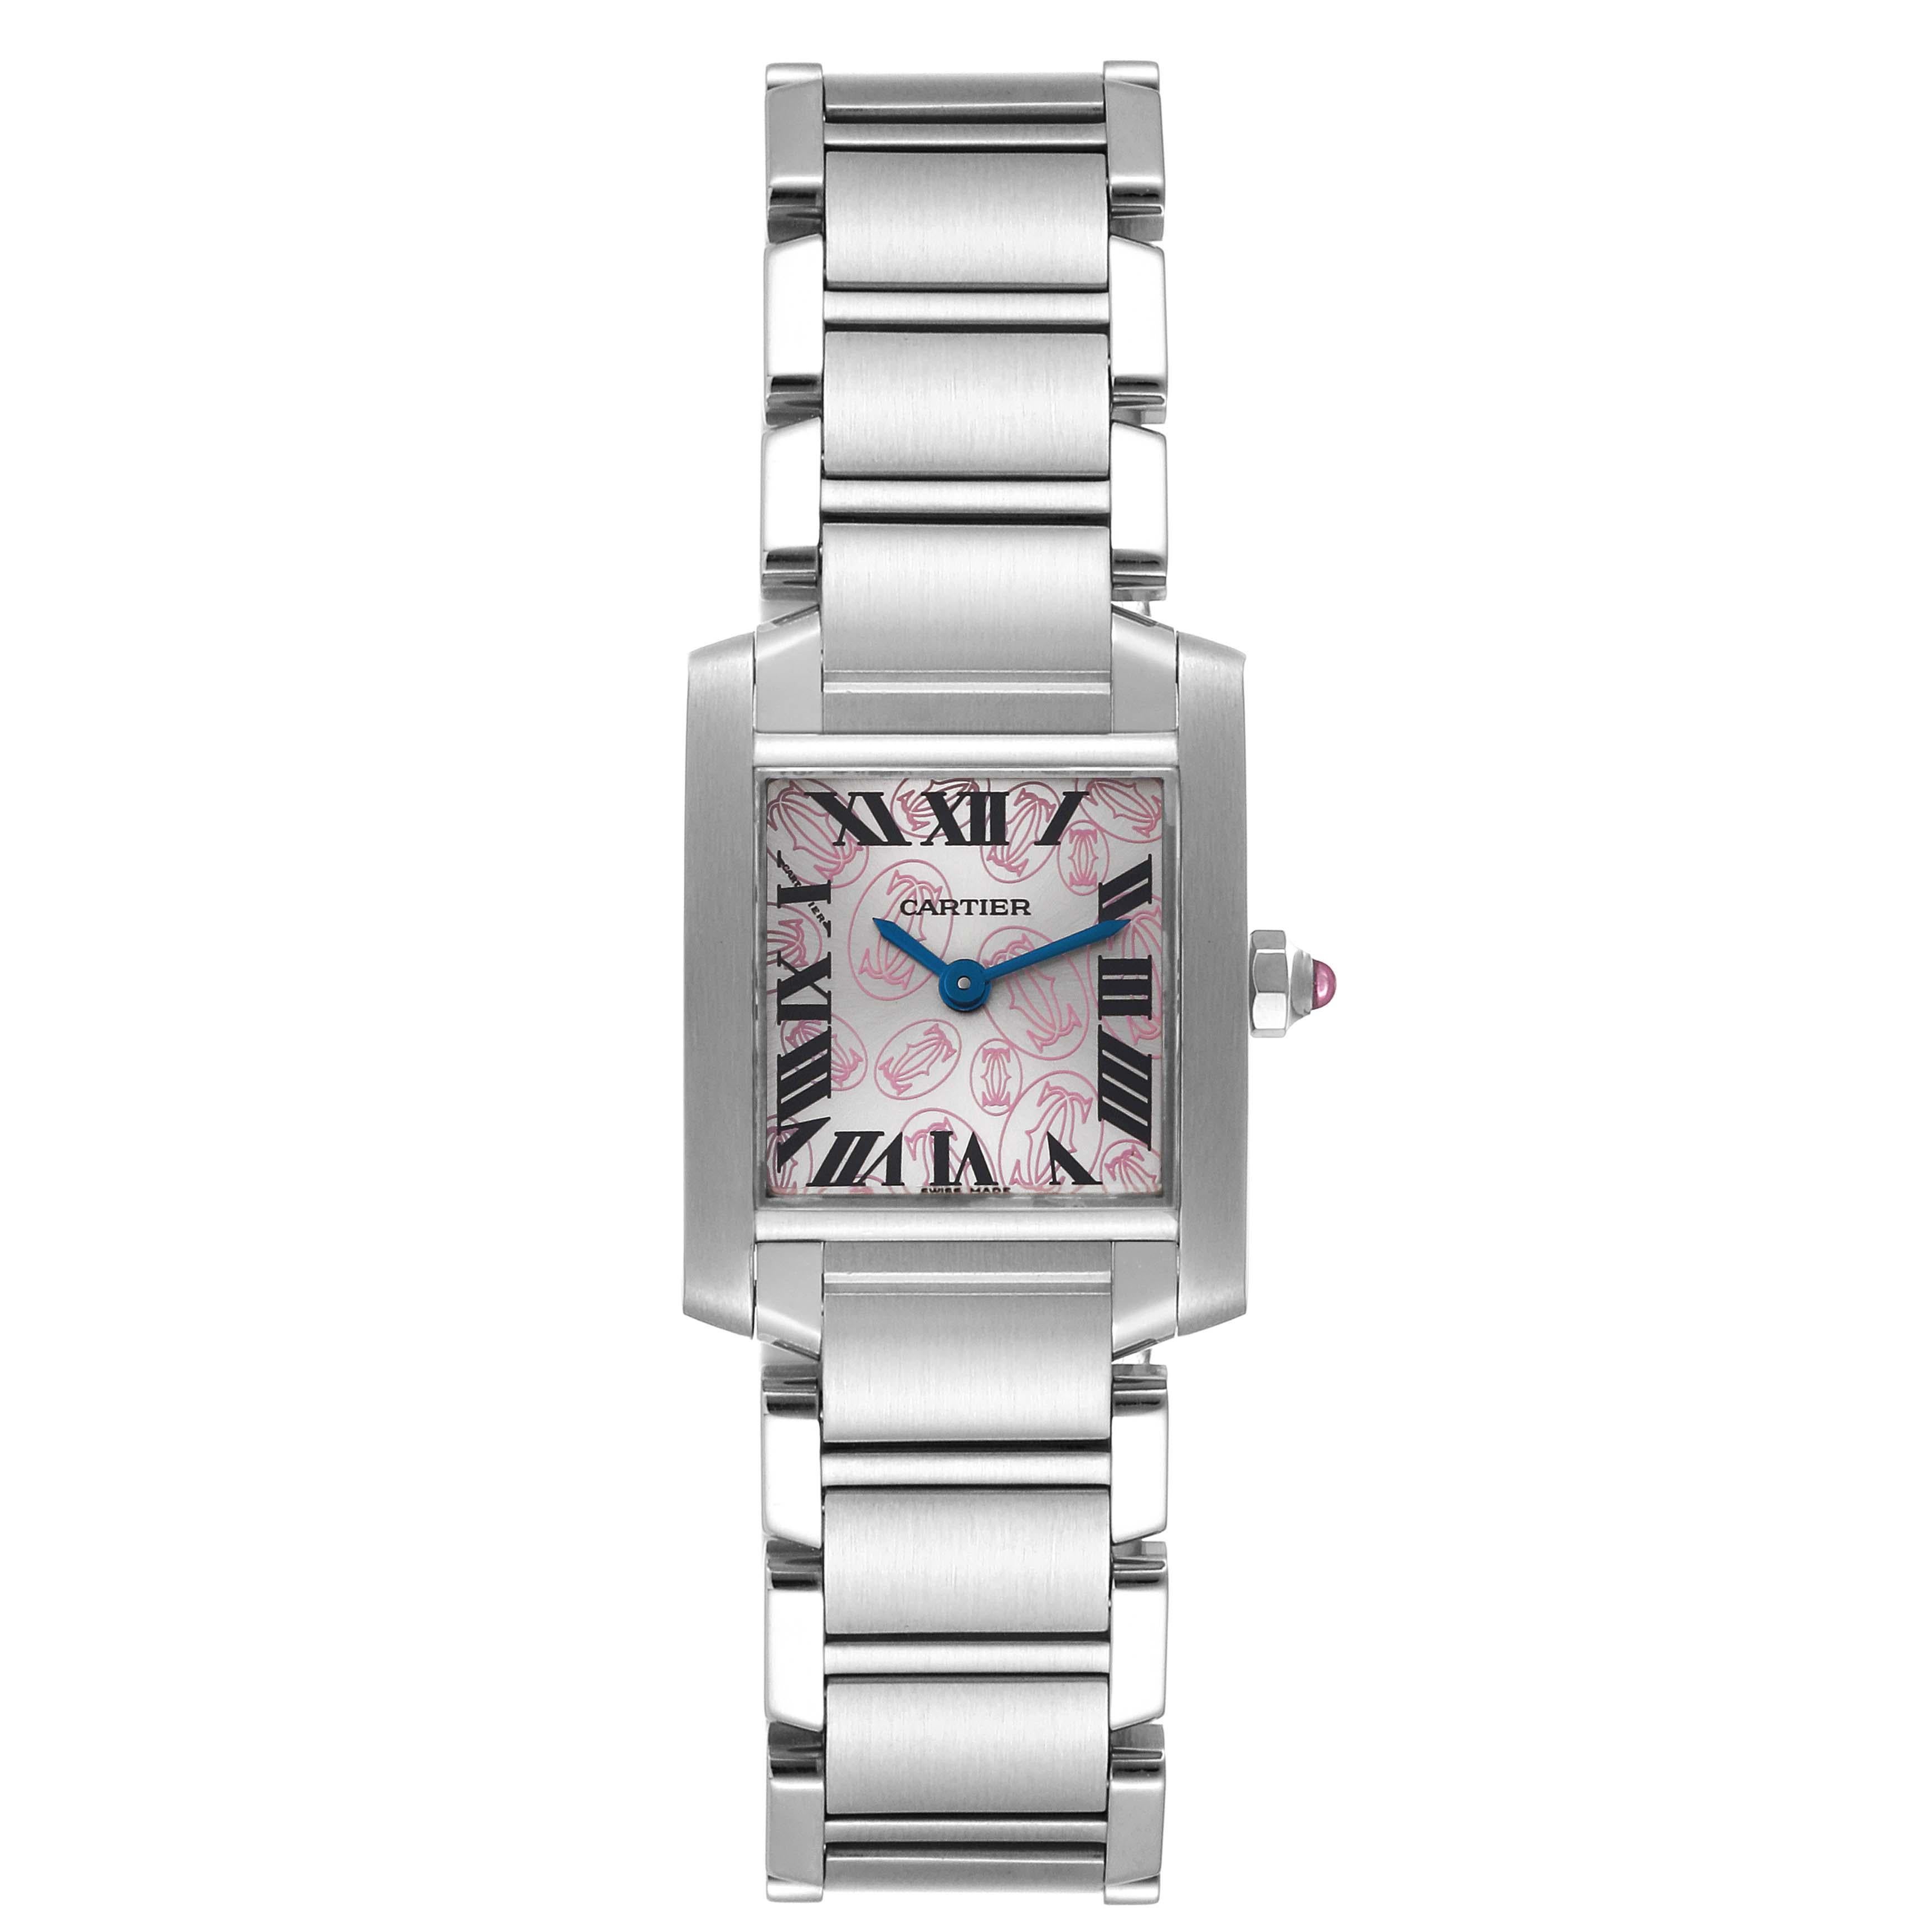 Cartier Tank Francaise Pink Double C Decor Limited Edition Steel Ladies Watch W51031Q3 Box Papers. Quartz movement. Rectangular stainless steel 20 x 25 mm case. Octagonal crown set with a pink spinel cabochon. . Scratch resistant sapphire crystal.